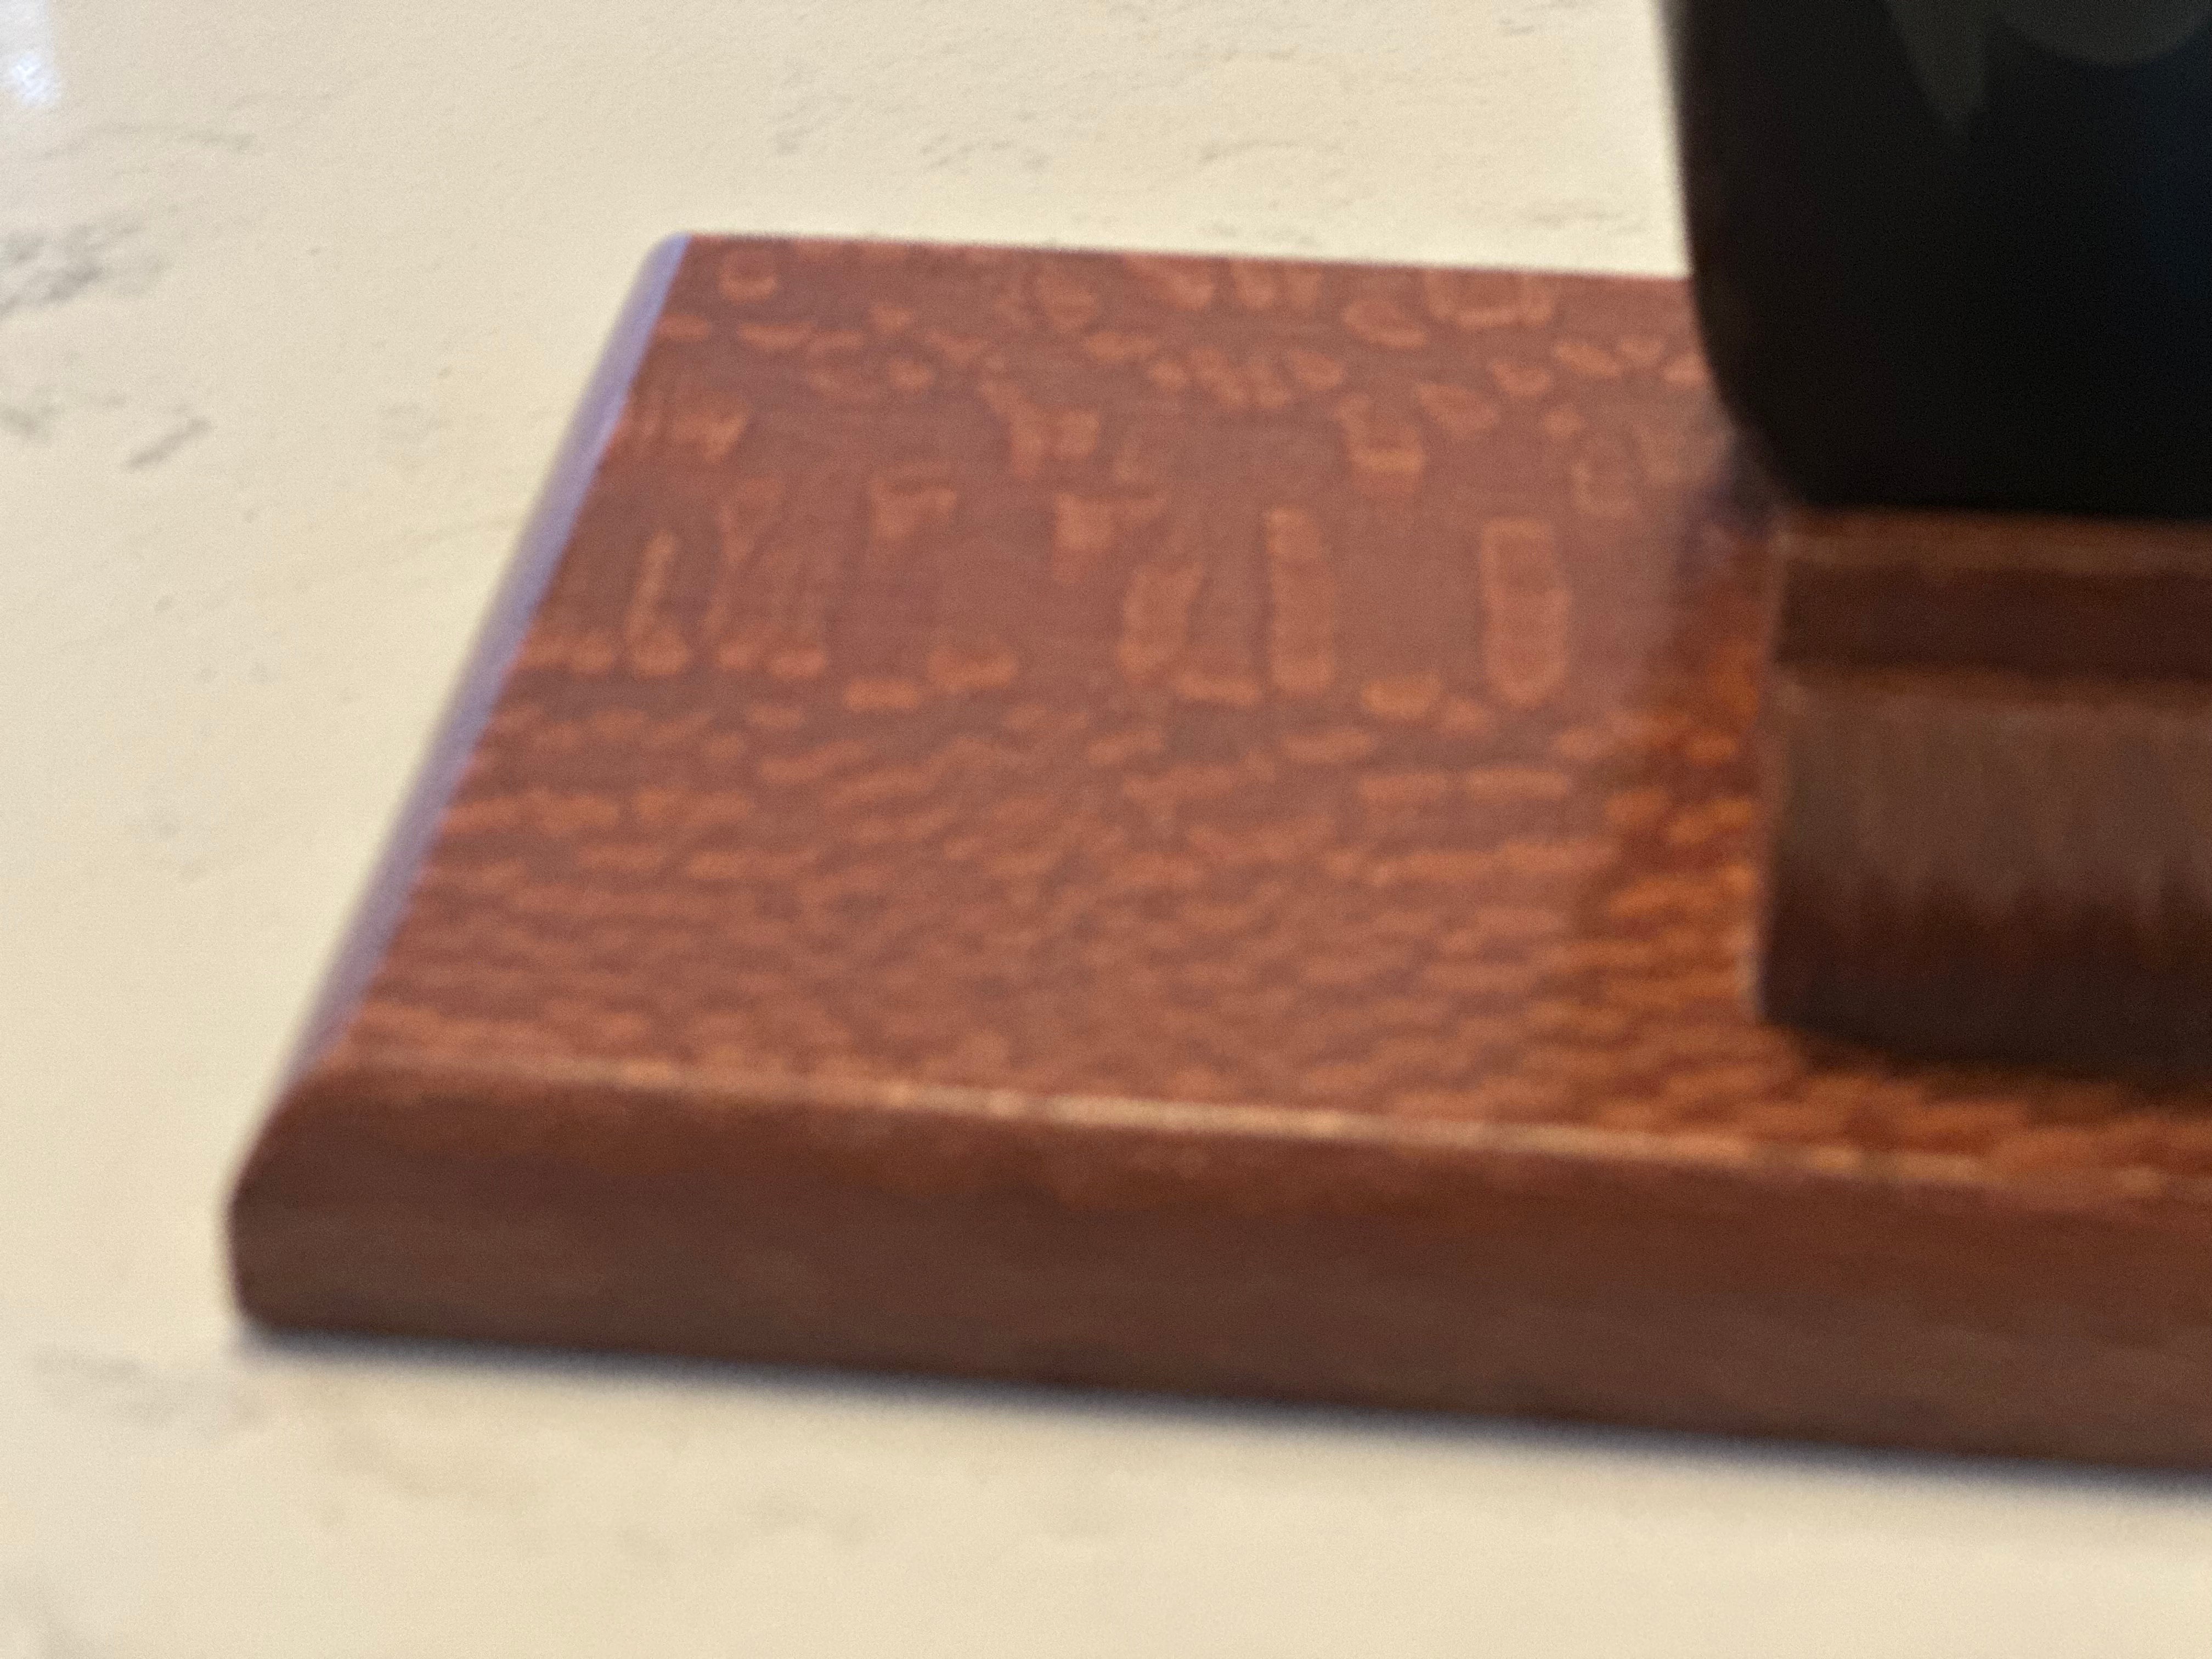 Wooden platform of the dab holder stand.